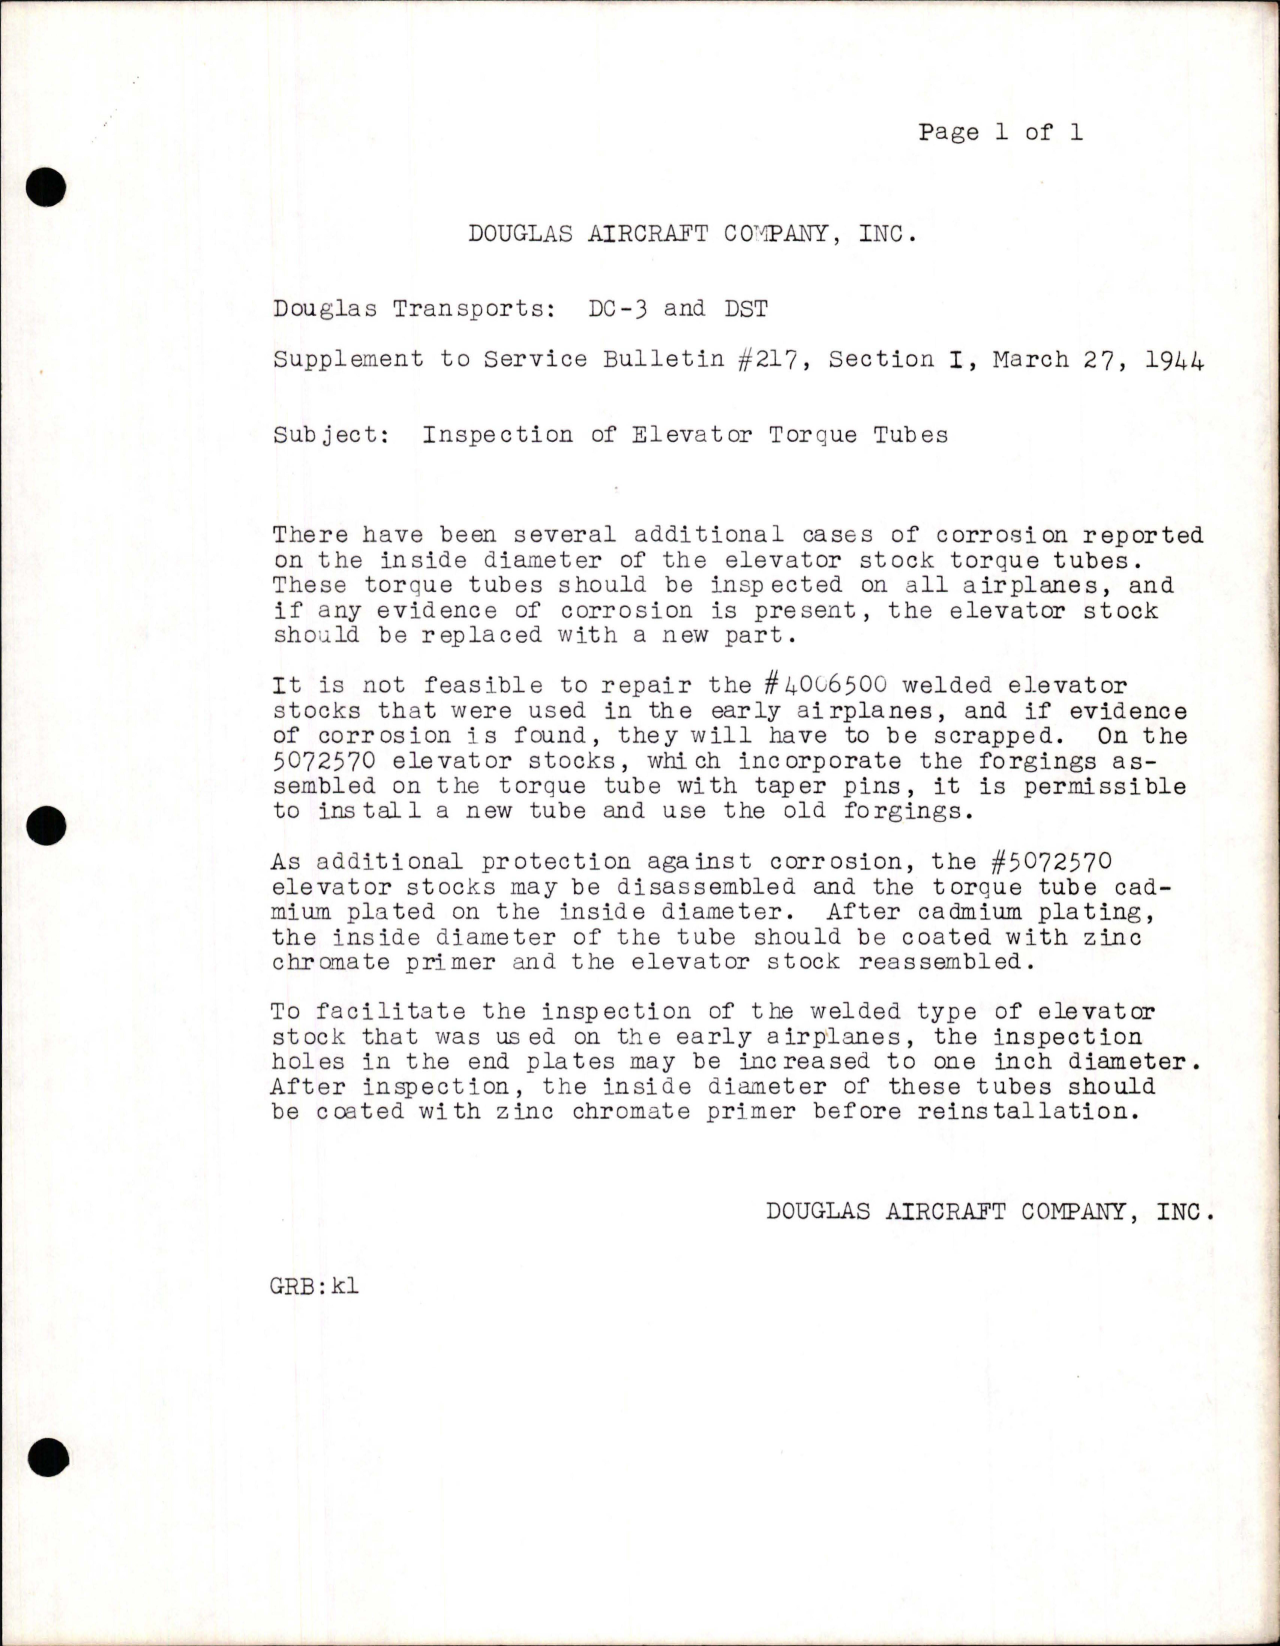 Sample page 1 from AirCorps Library document: Inspection of Elevator Torque Tube